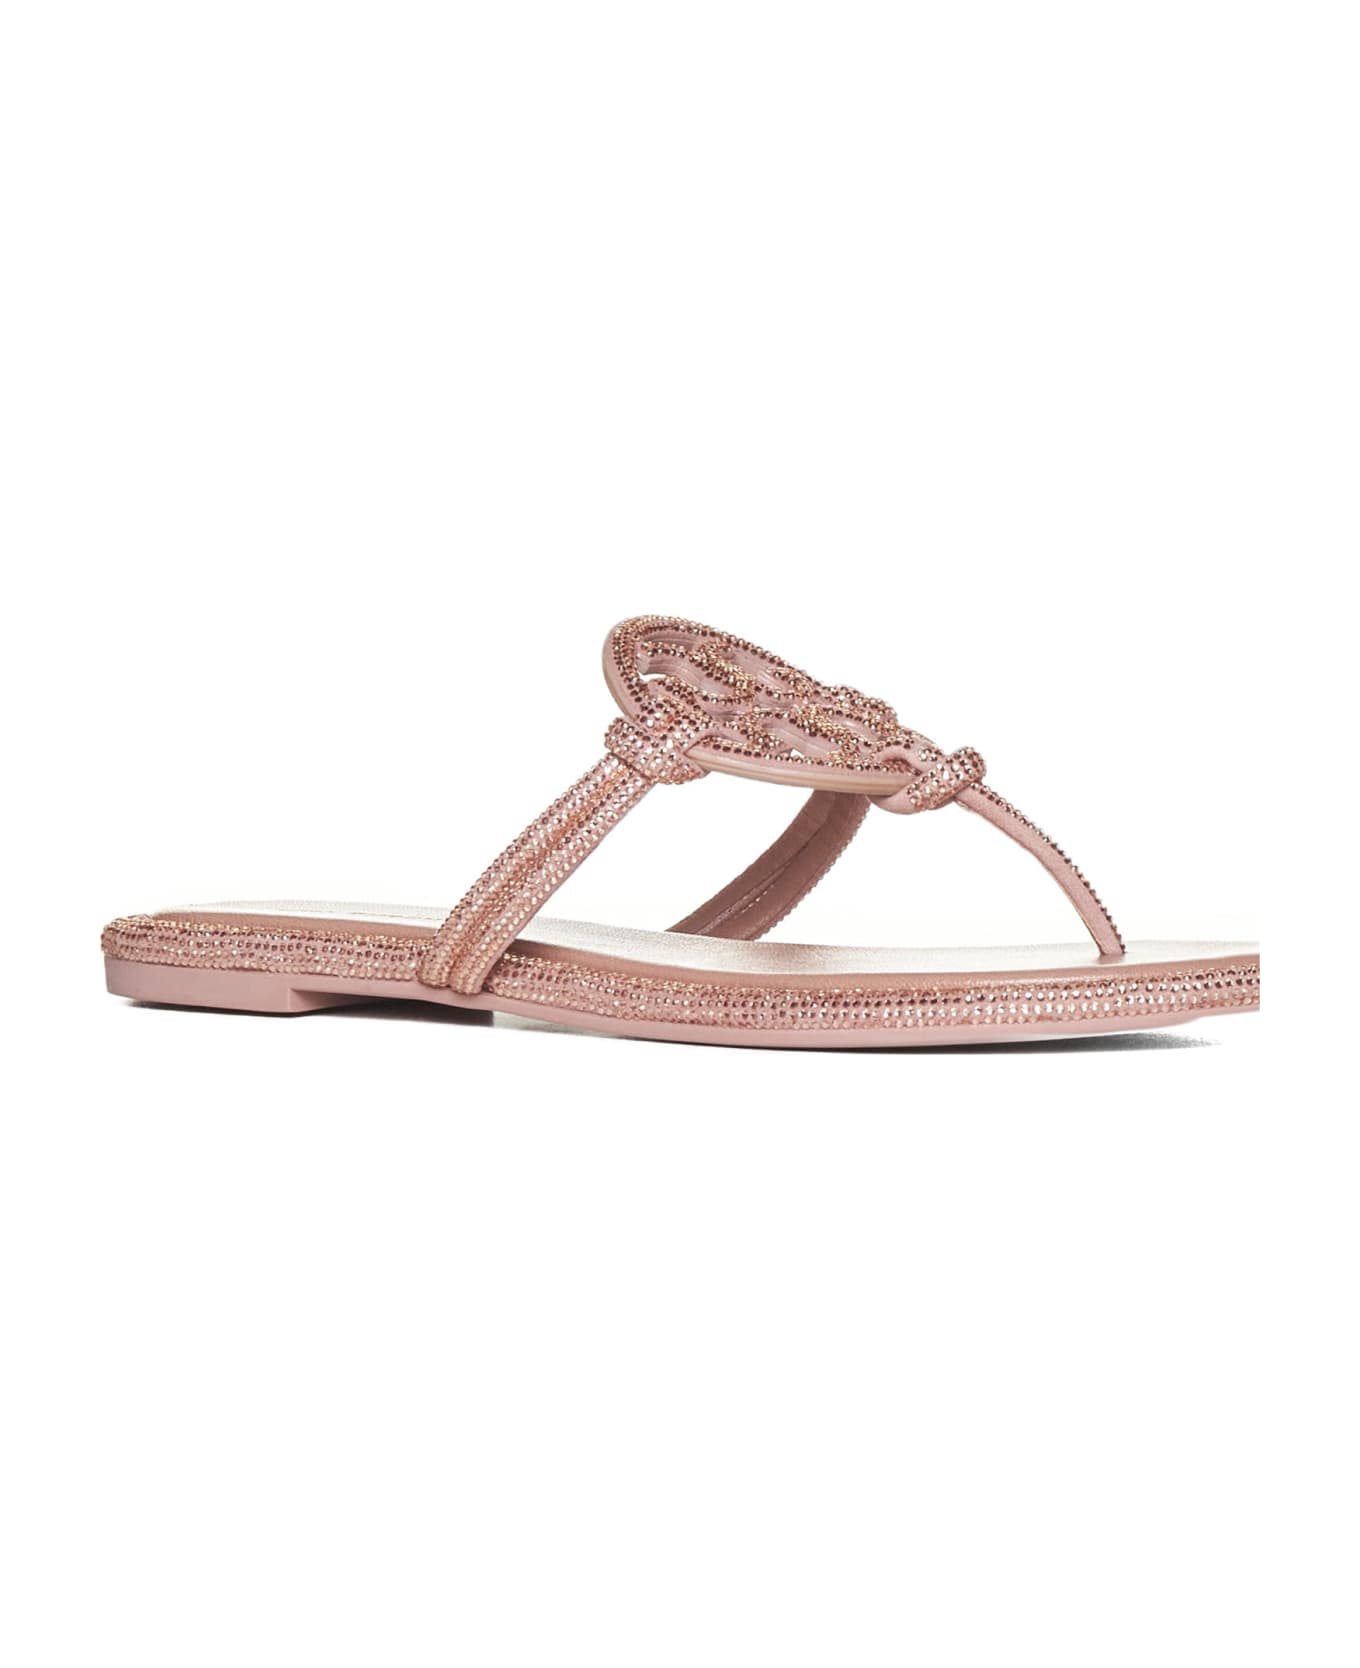 Tory Burch Miller Knotted Pave Embellished Sandals - Pink